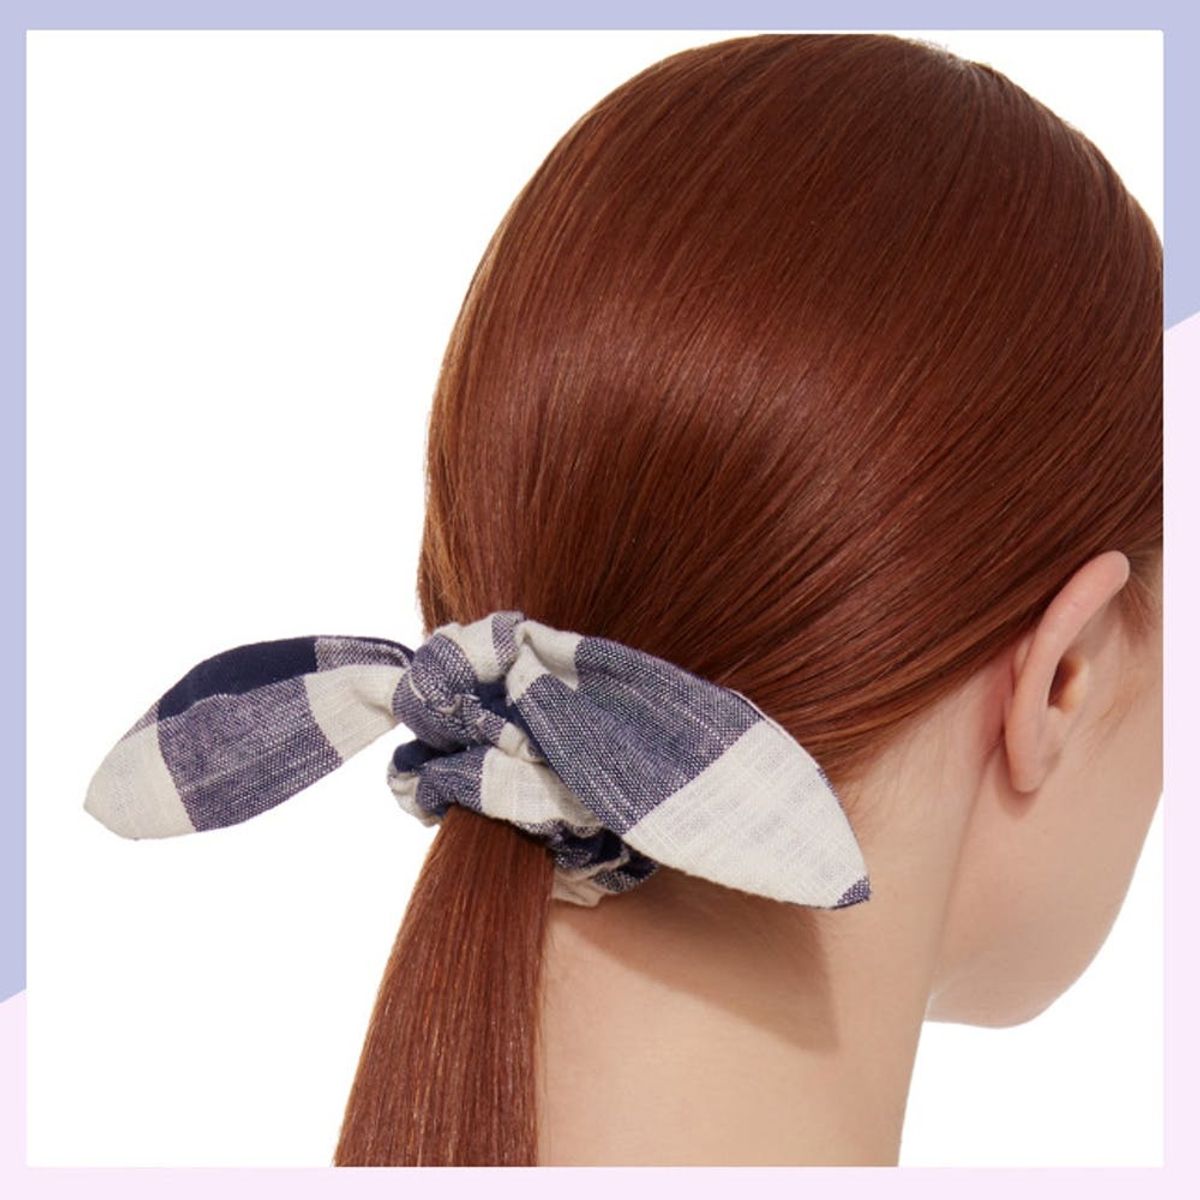 Yes, Scrunchies Are Back for Spring, So Just Go With It